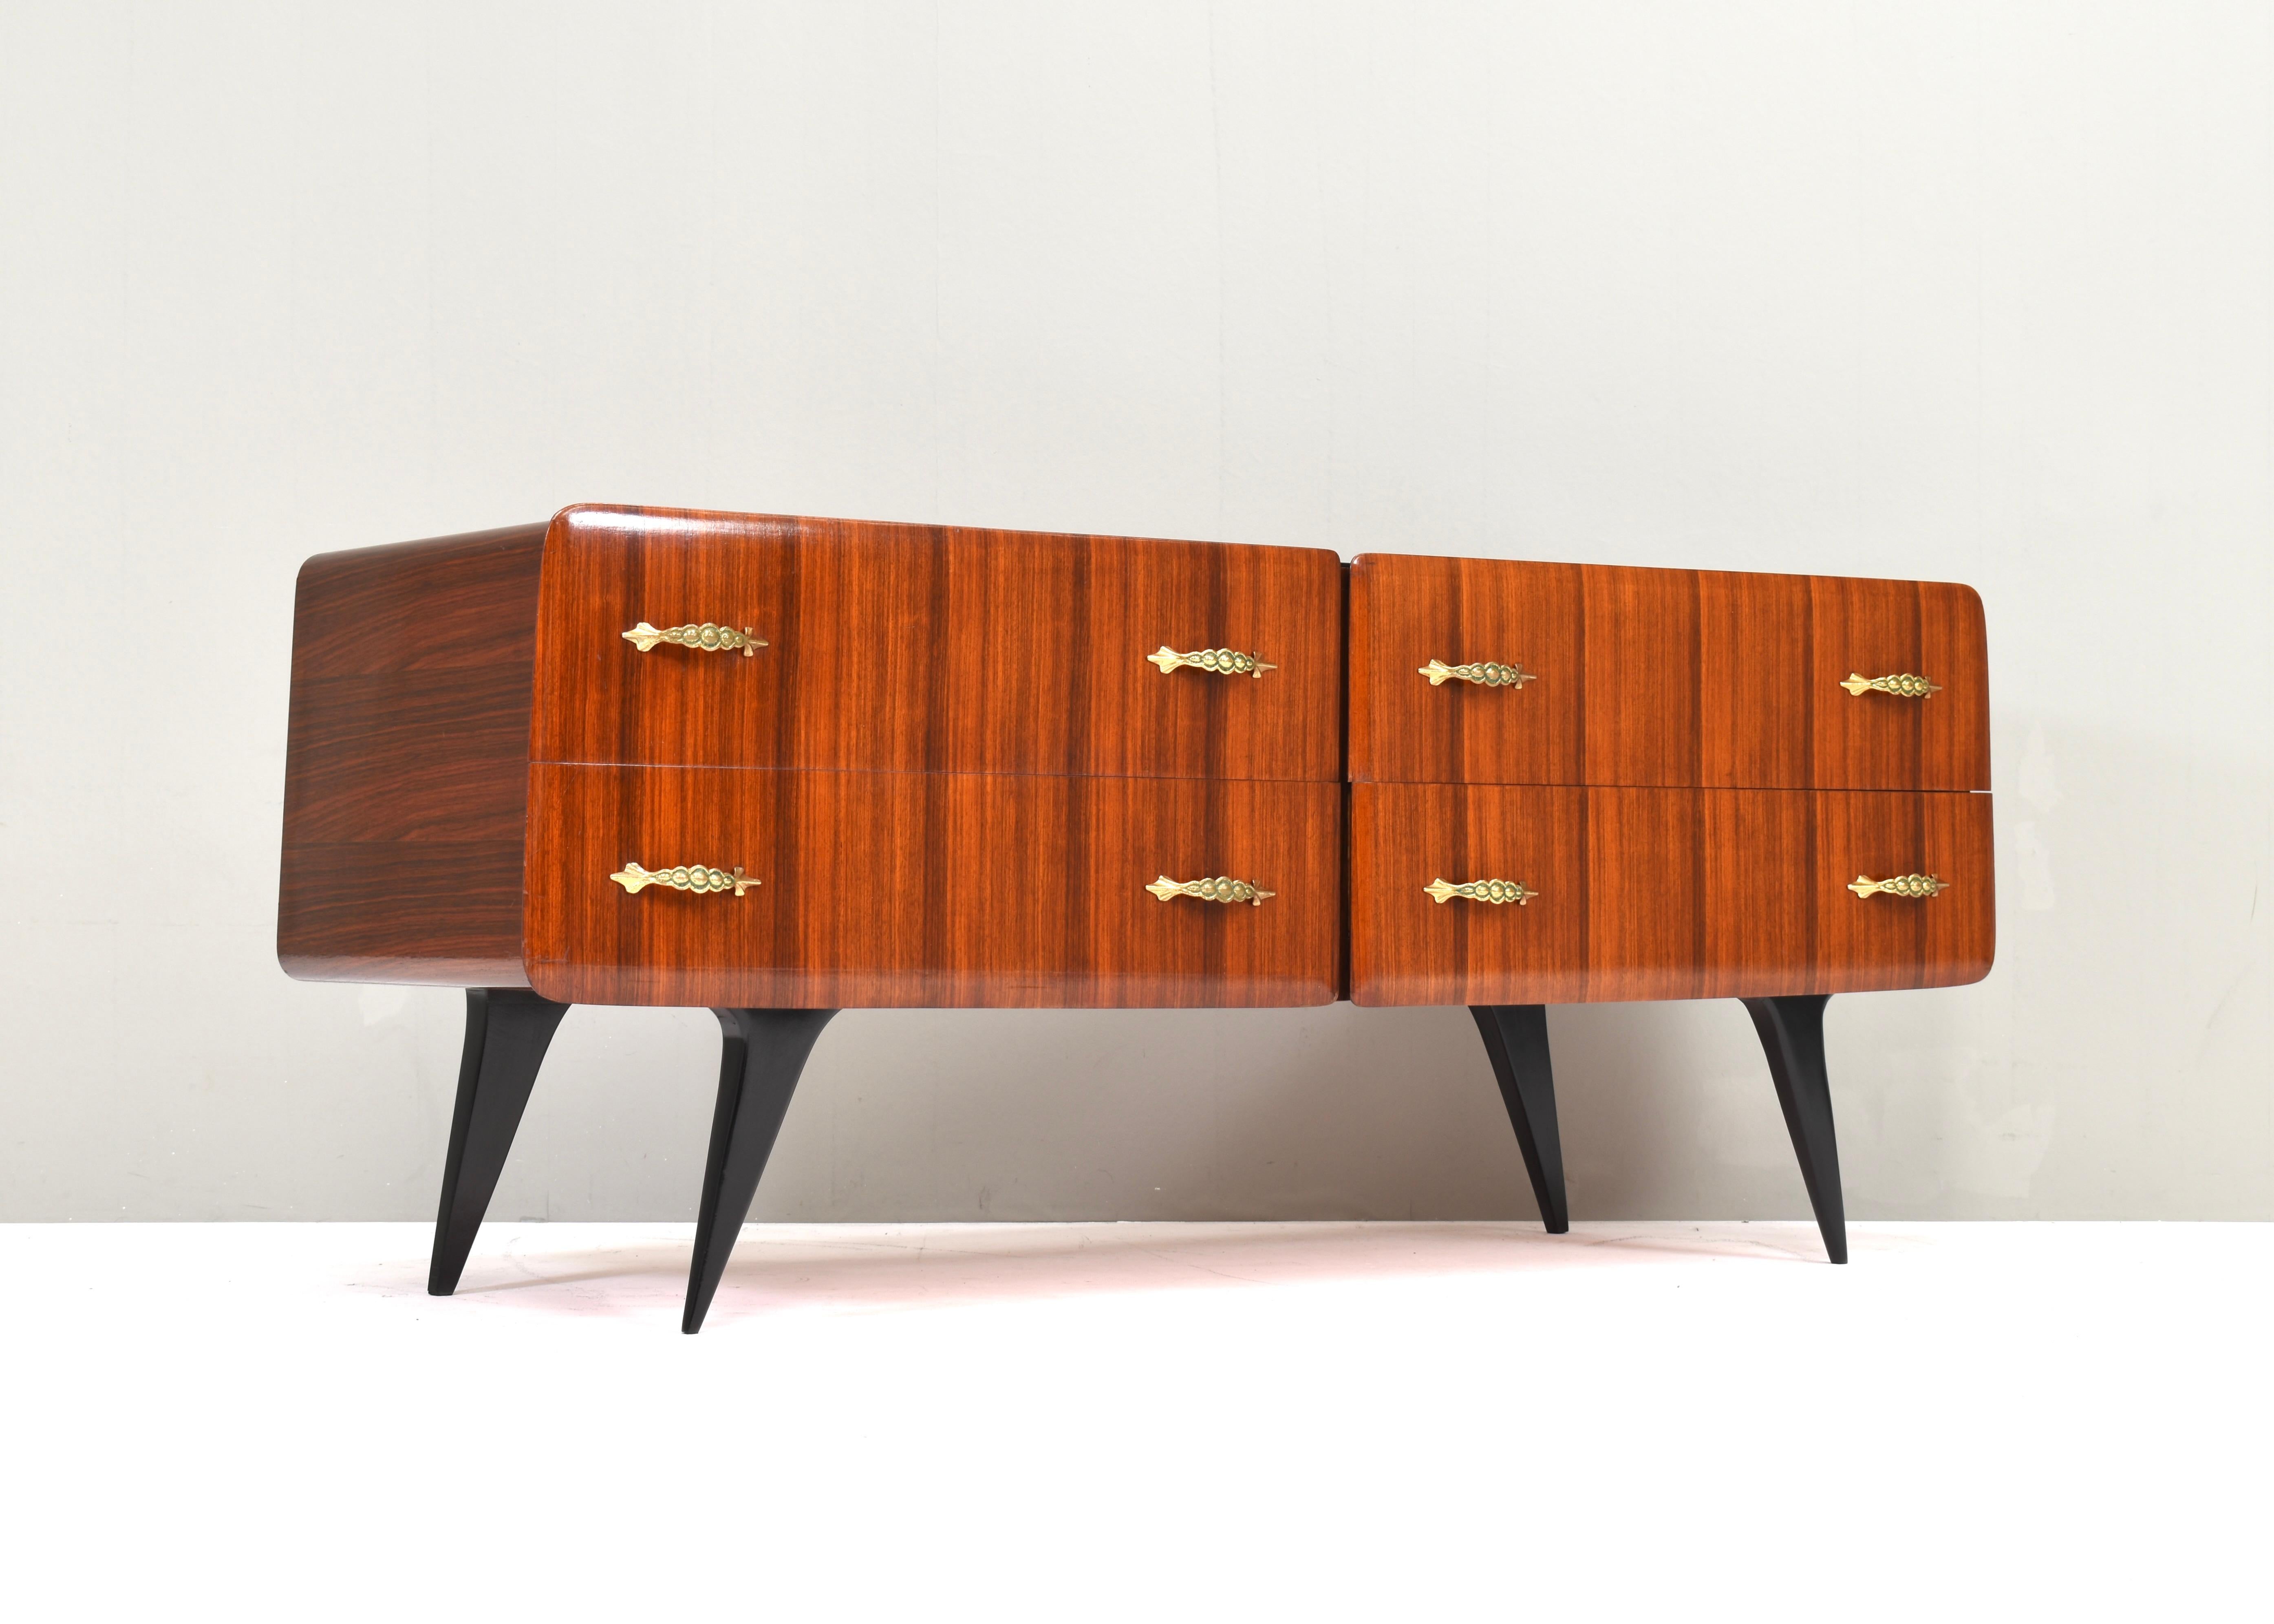 Introducing this sophisticated sideboard by or in the style of Vittorio Dassi  in Italian Walnut and black glass – where timeless elegance meets modern functionality. Crafted with precision and imbued with Italian craftsmanship, this masterpiece